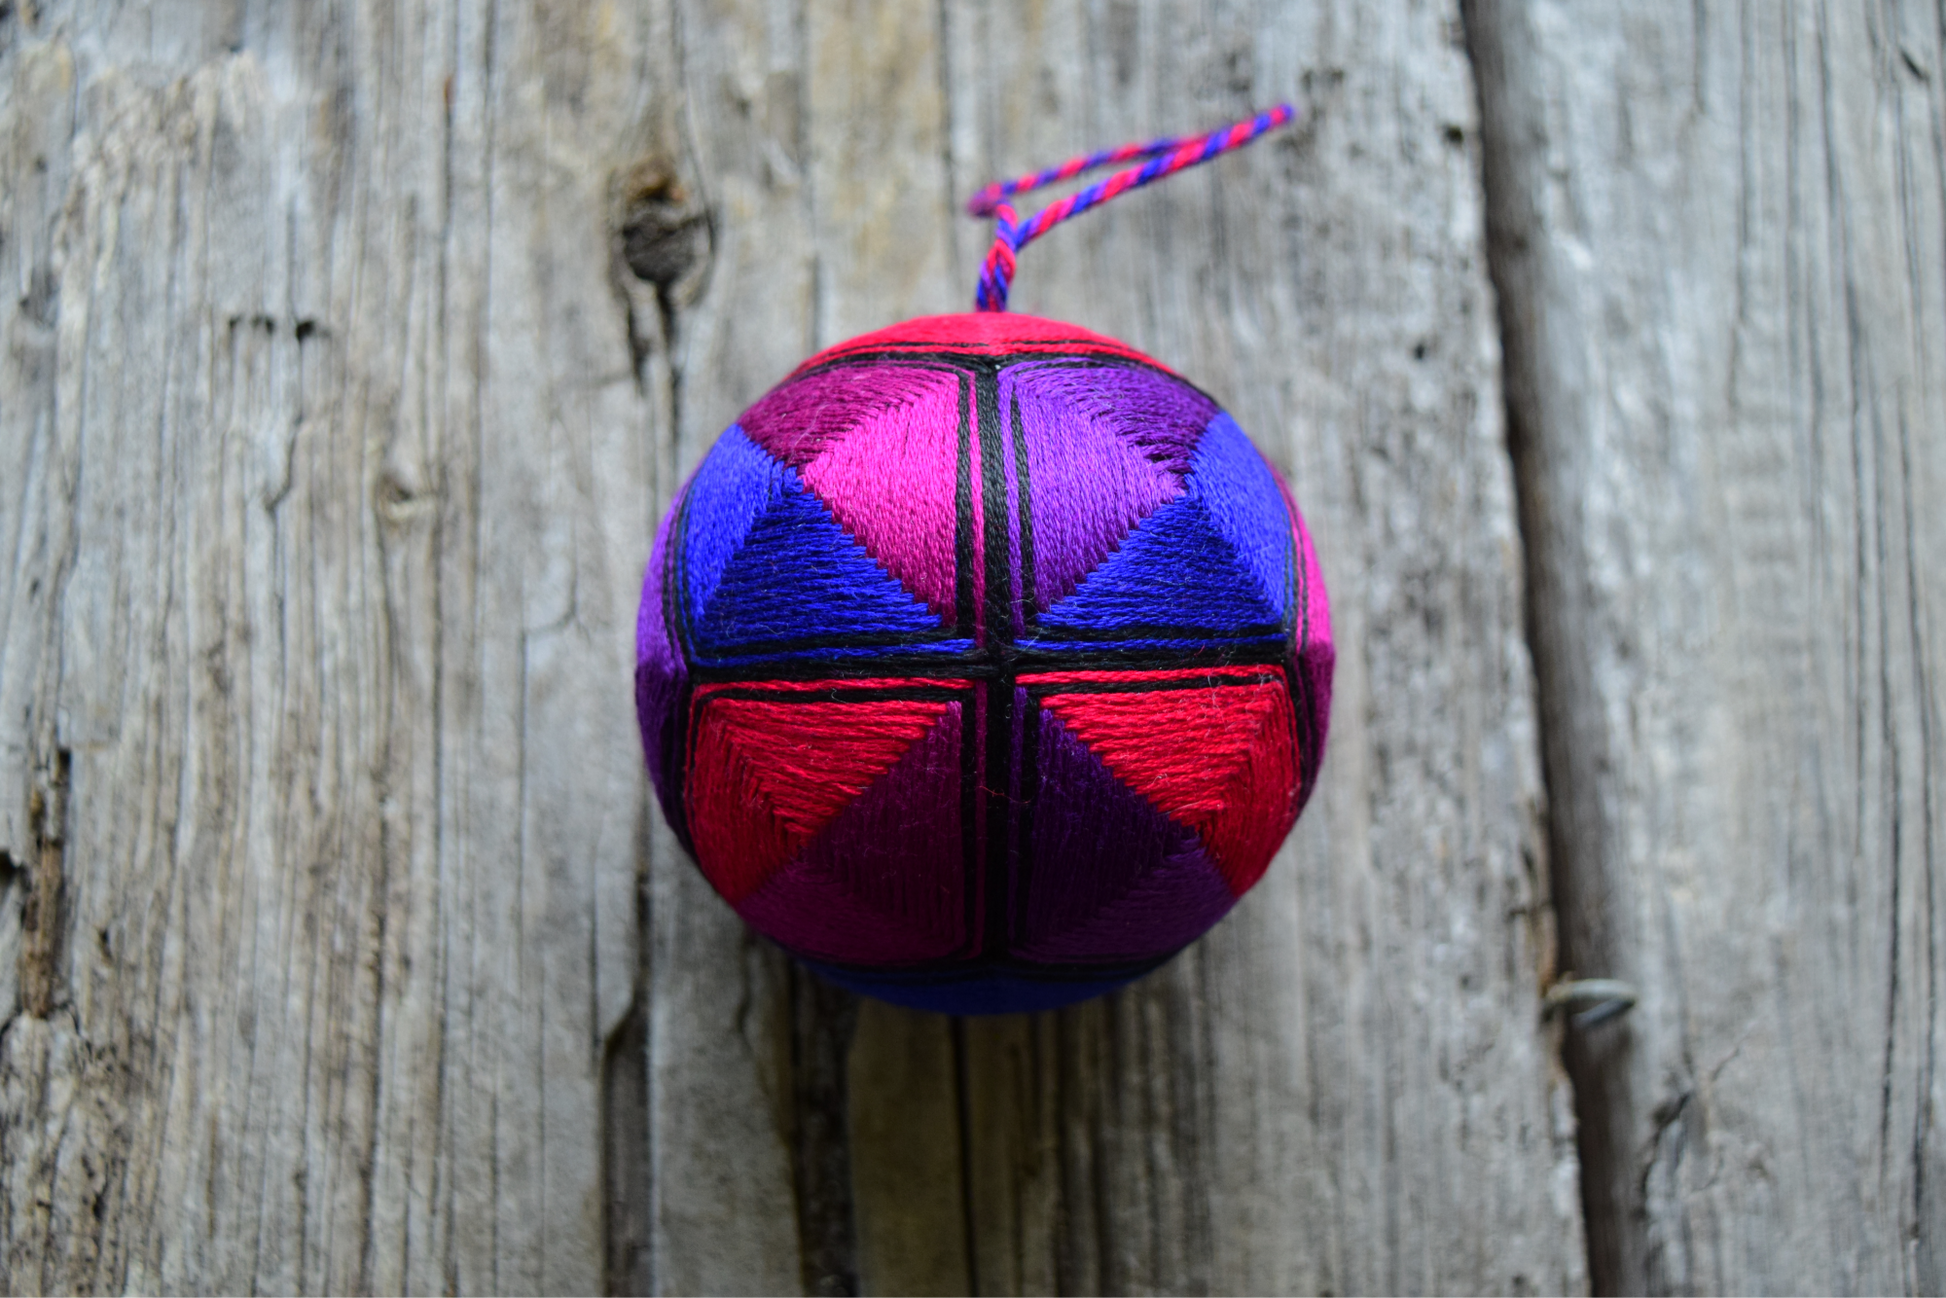 Japanese kousa temari ball stitched in red, purple, blue on wood background